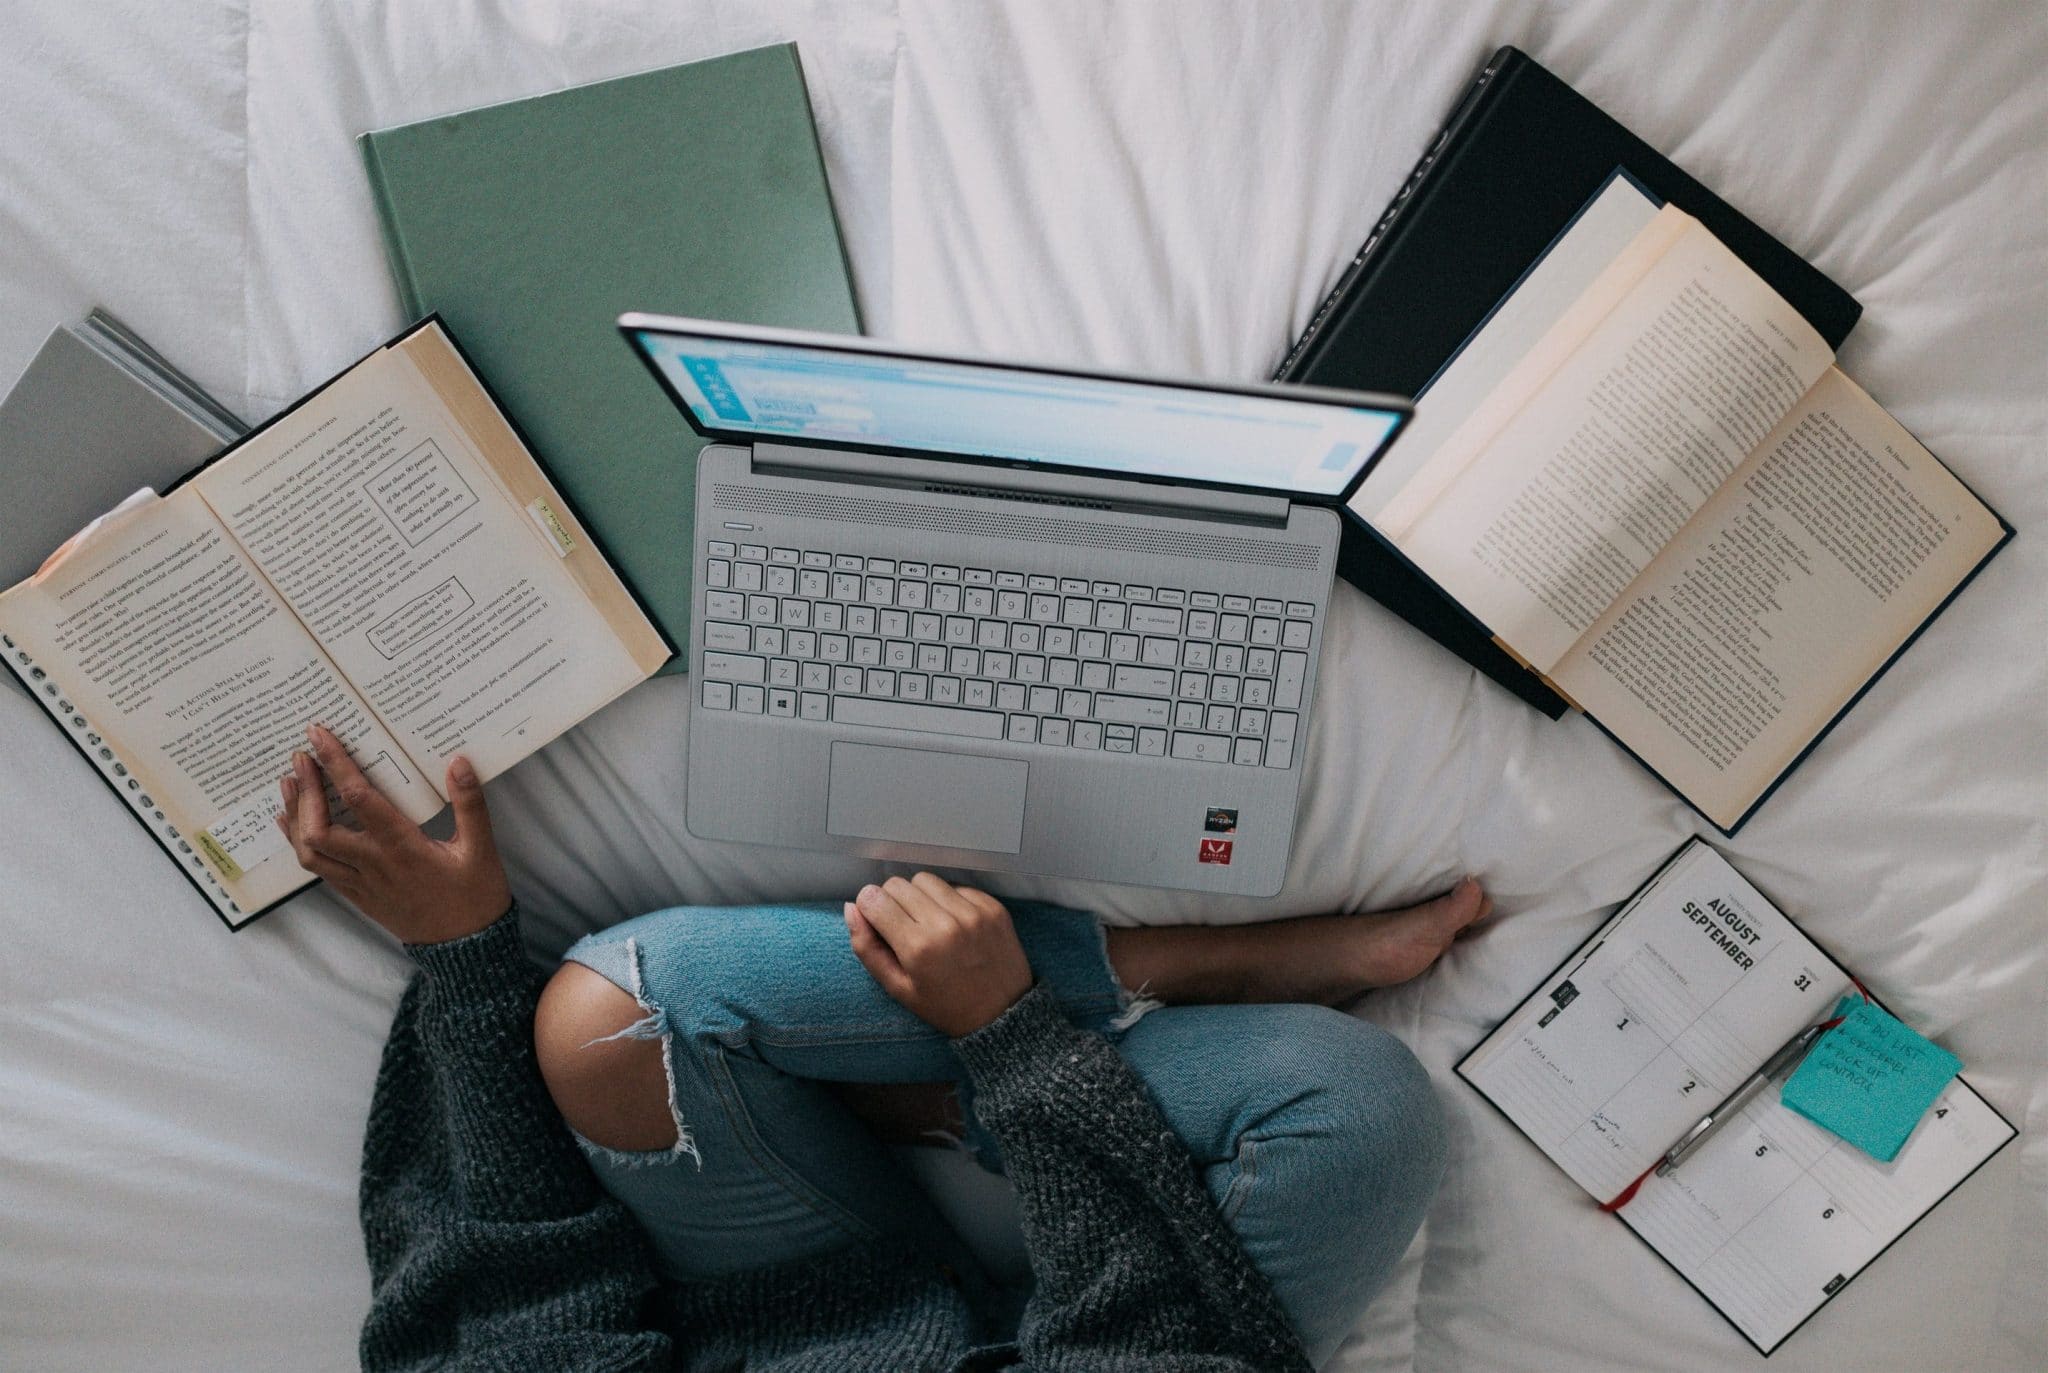 Woman sitting on bed surrounded by books for research, her laptop, and a planner.